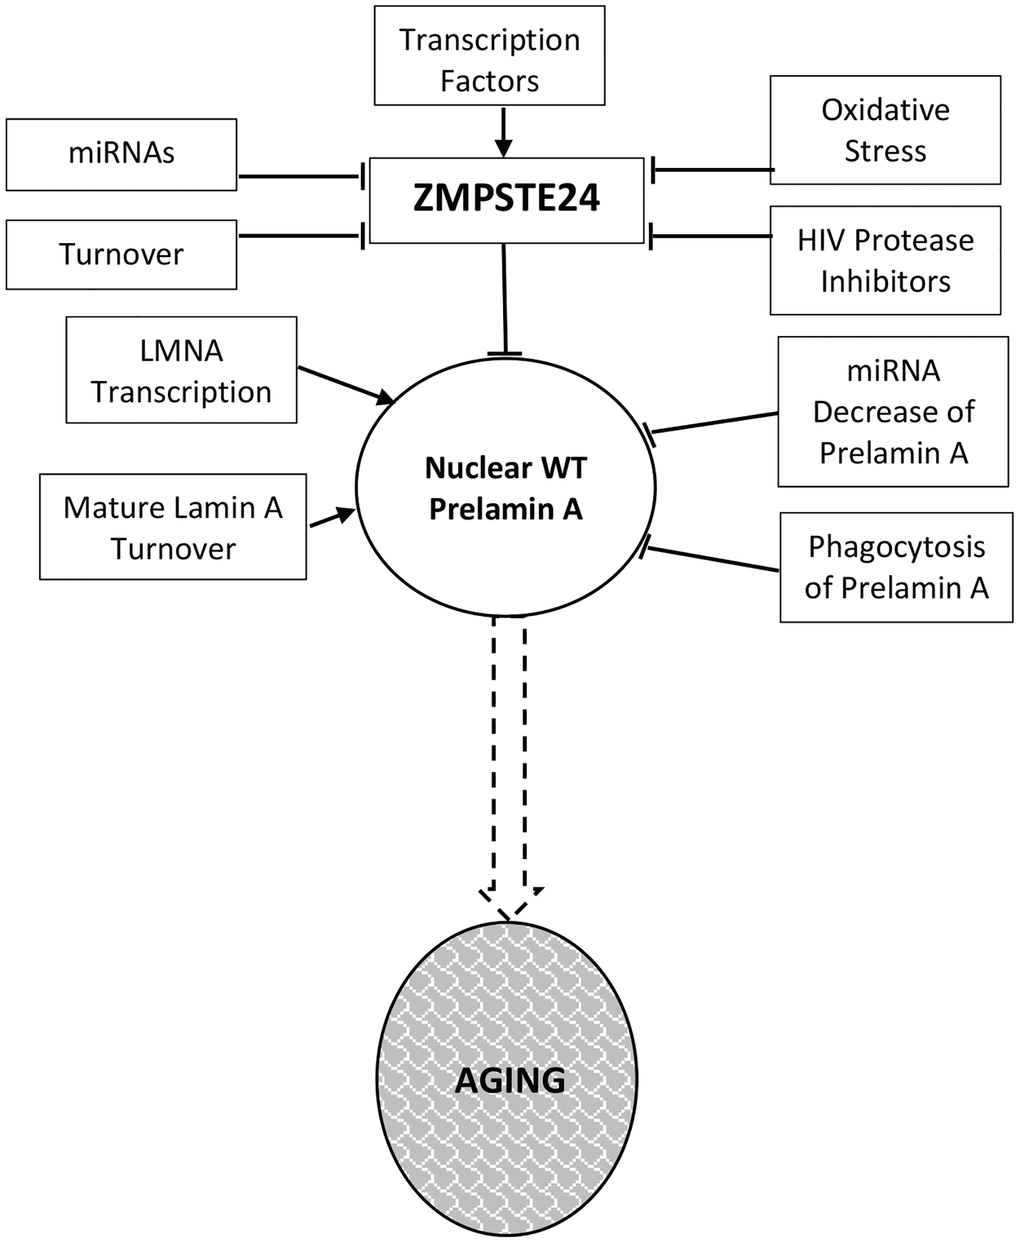 Prelamin a regulation in normal aging. Levels and activity of Zmpste24 are regulated in several ways related to aging. Reduced enzymatic activity is proposed to lead to increased levels of prelamin A and consequent aging phenotypes. These pathways are described throughout the text.